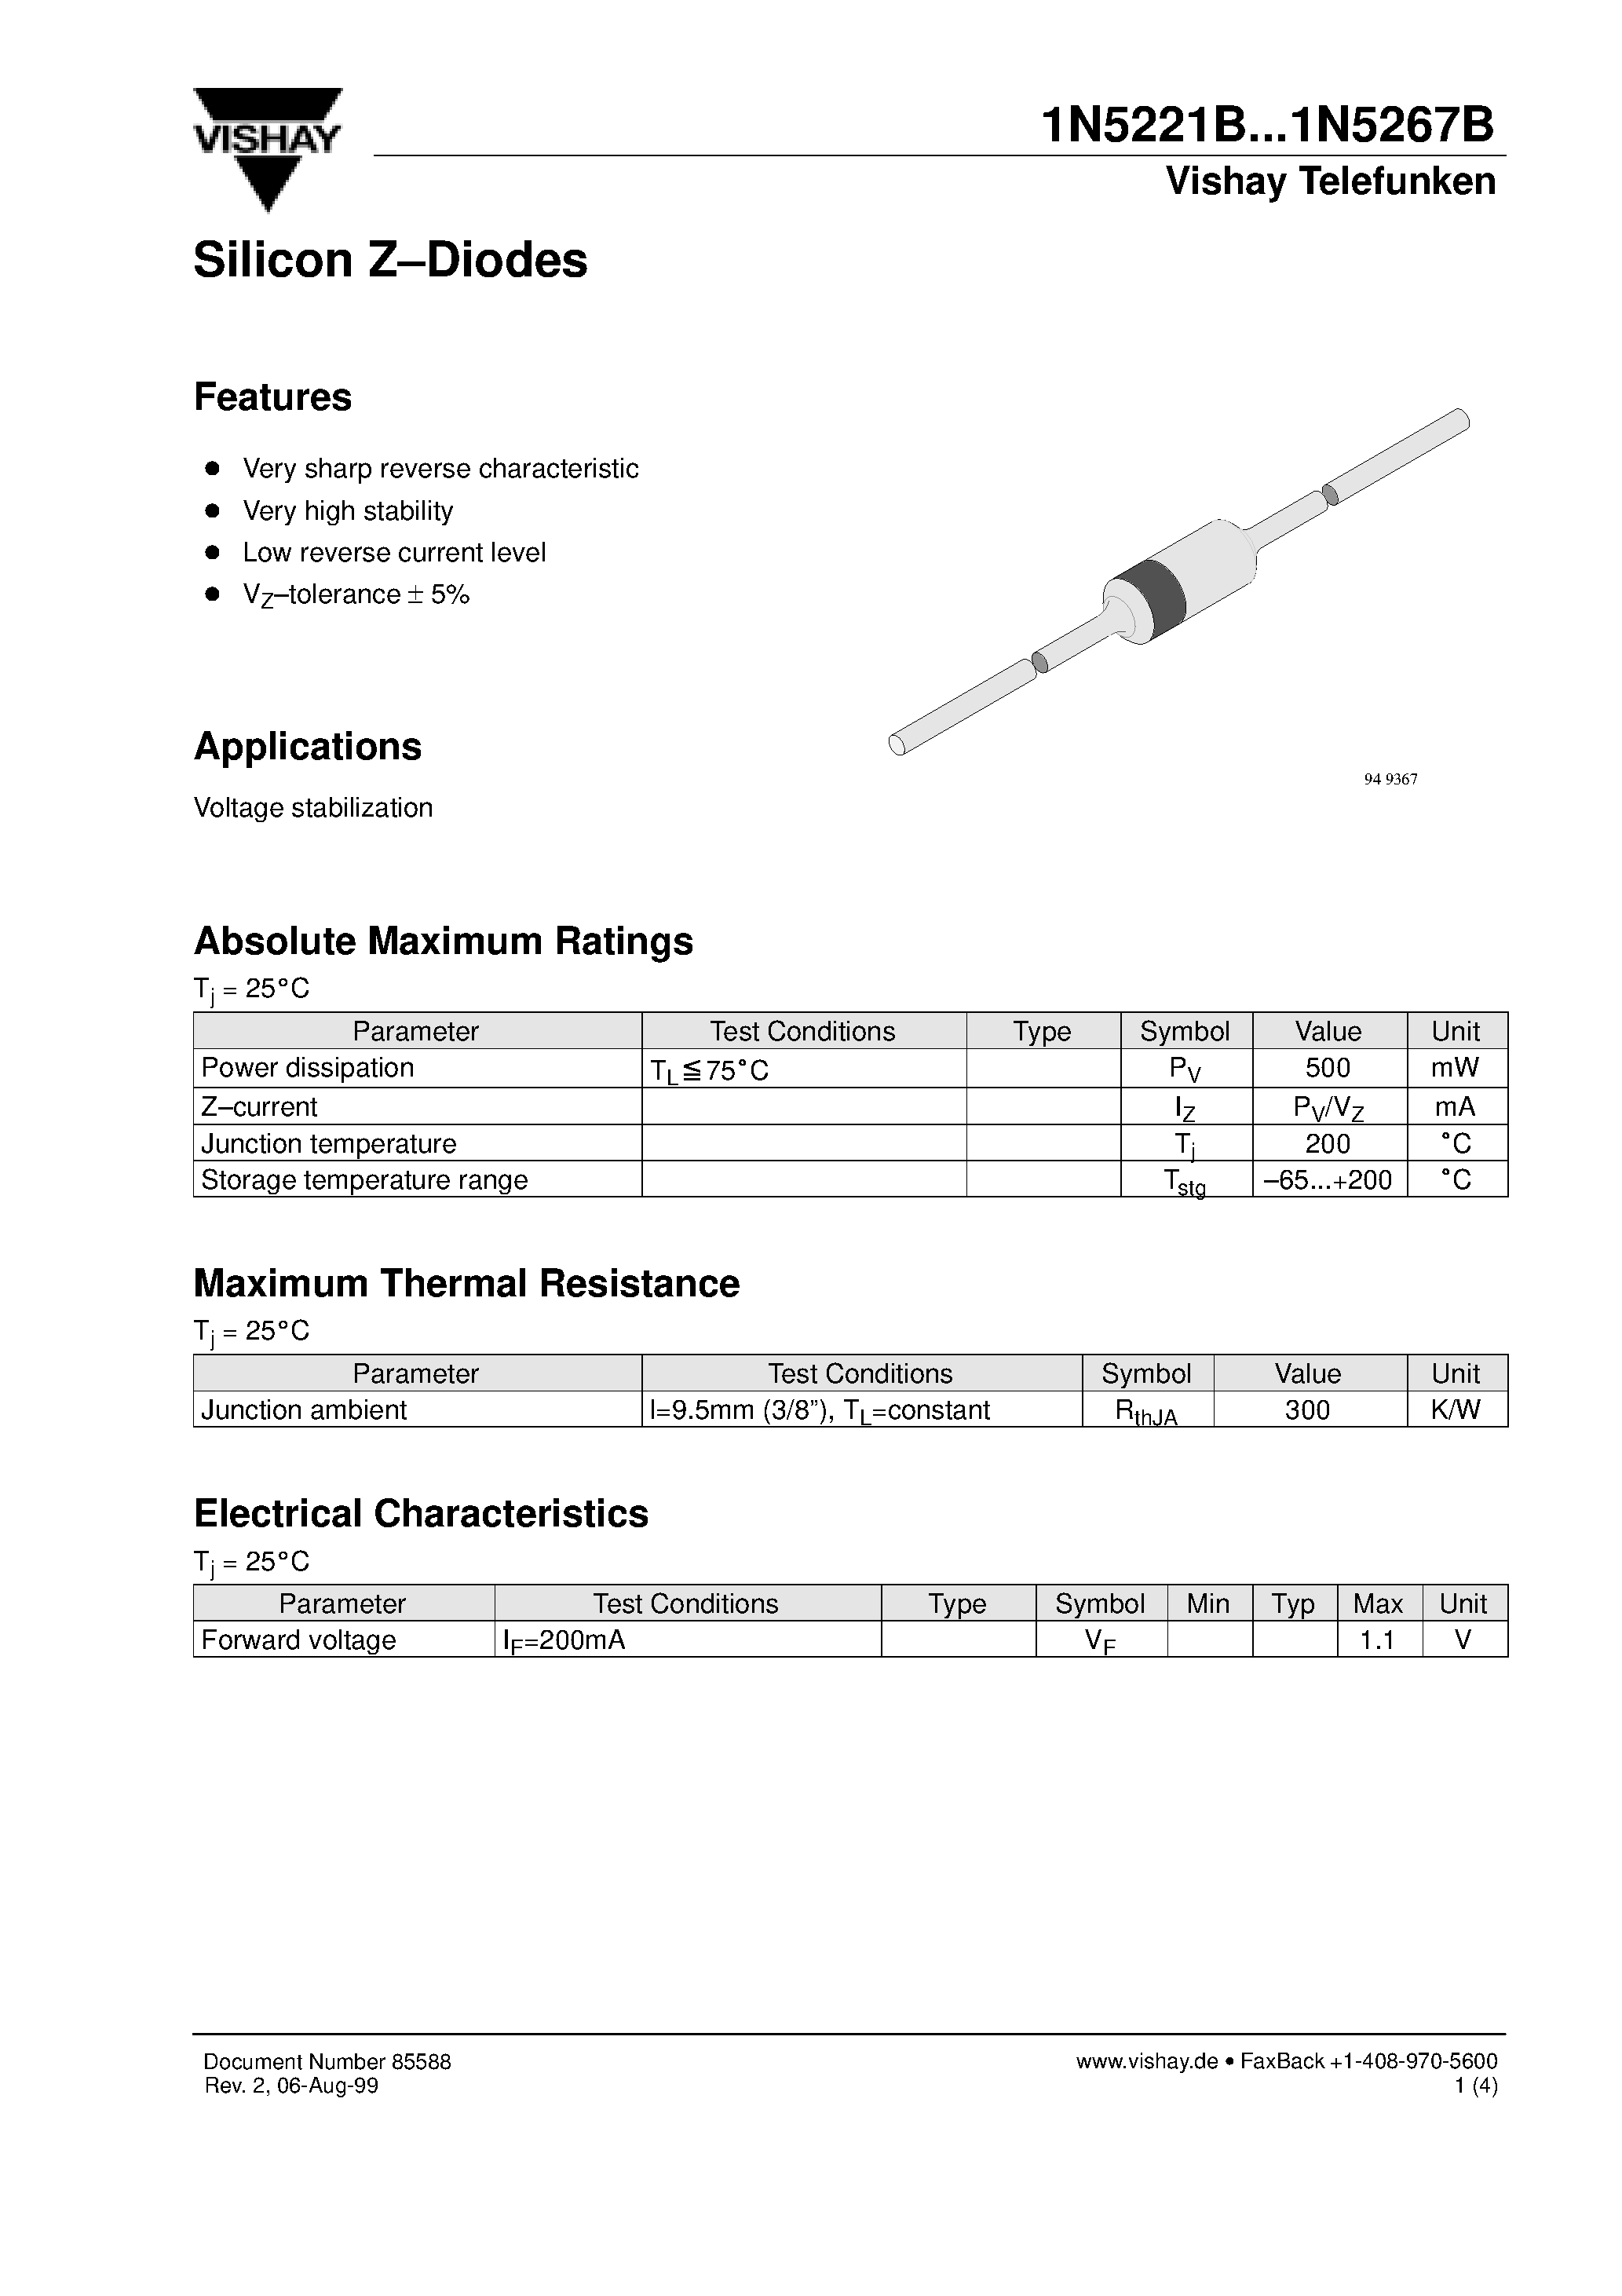 Datasheet 1N5230B - Silicon Z-Diodes page 1